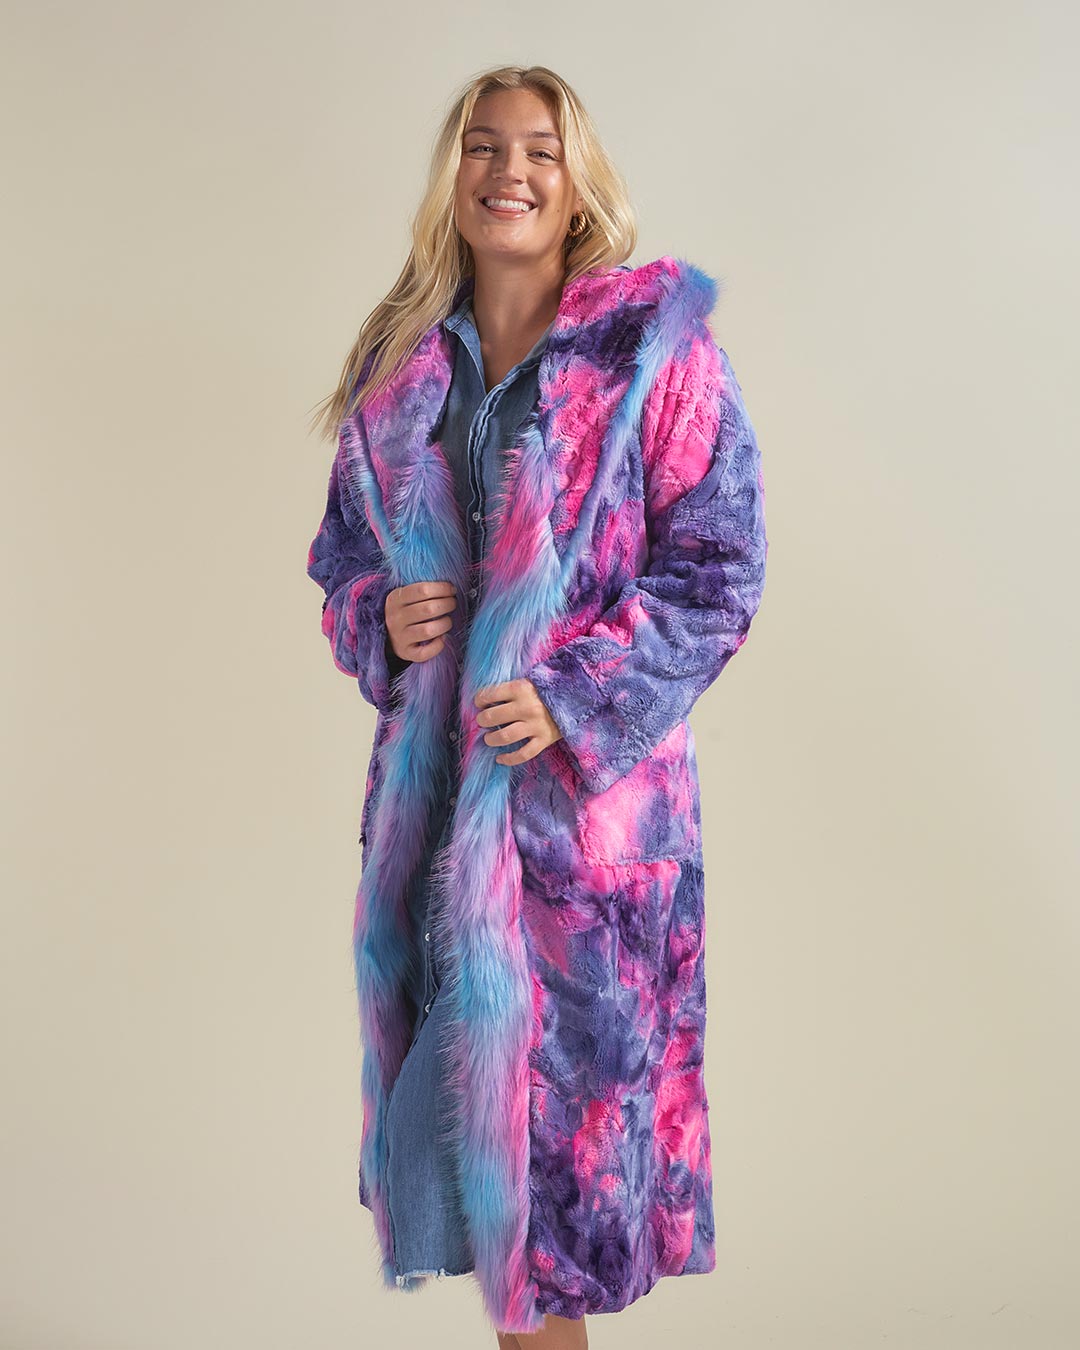 Cotton Candy Kitty Classic Faux Fur Style Robe on Female Model